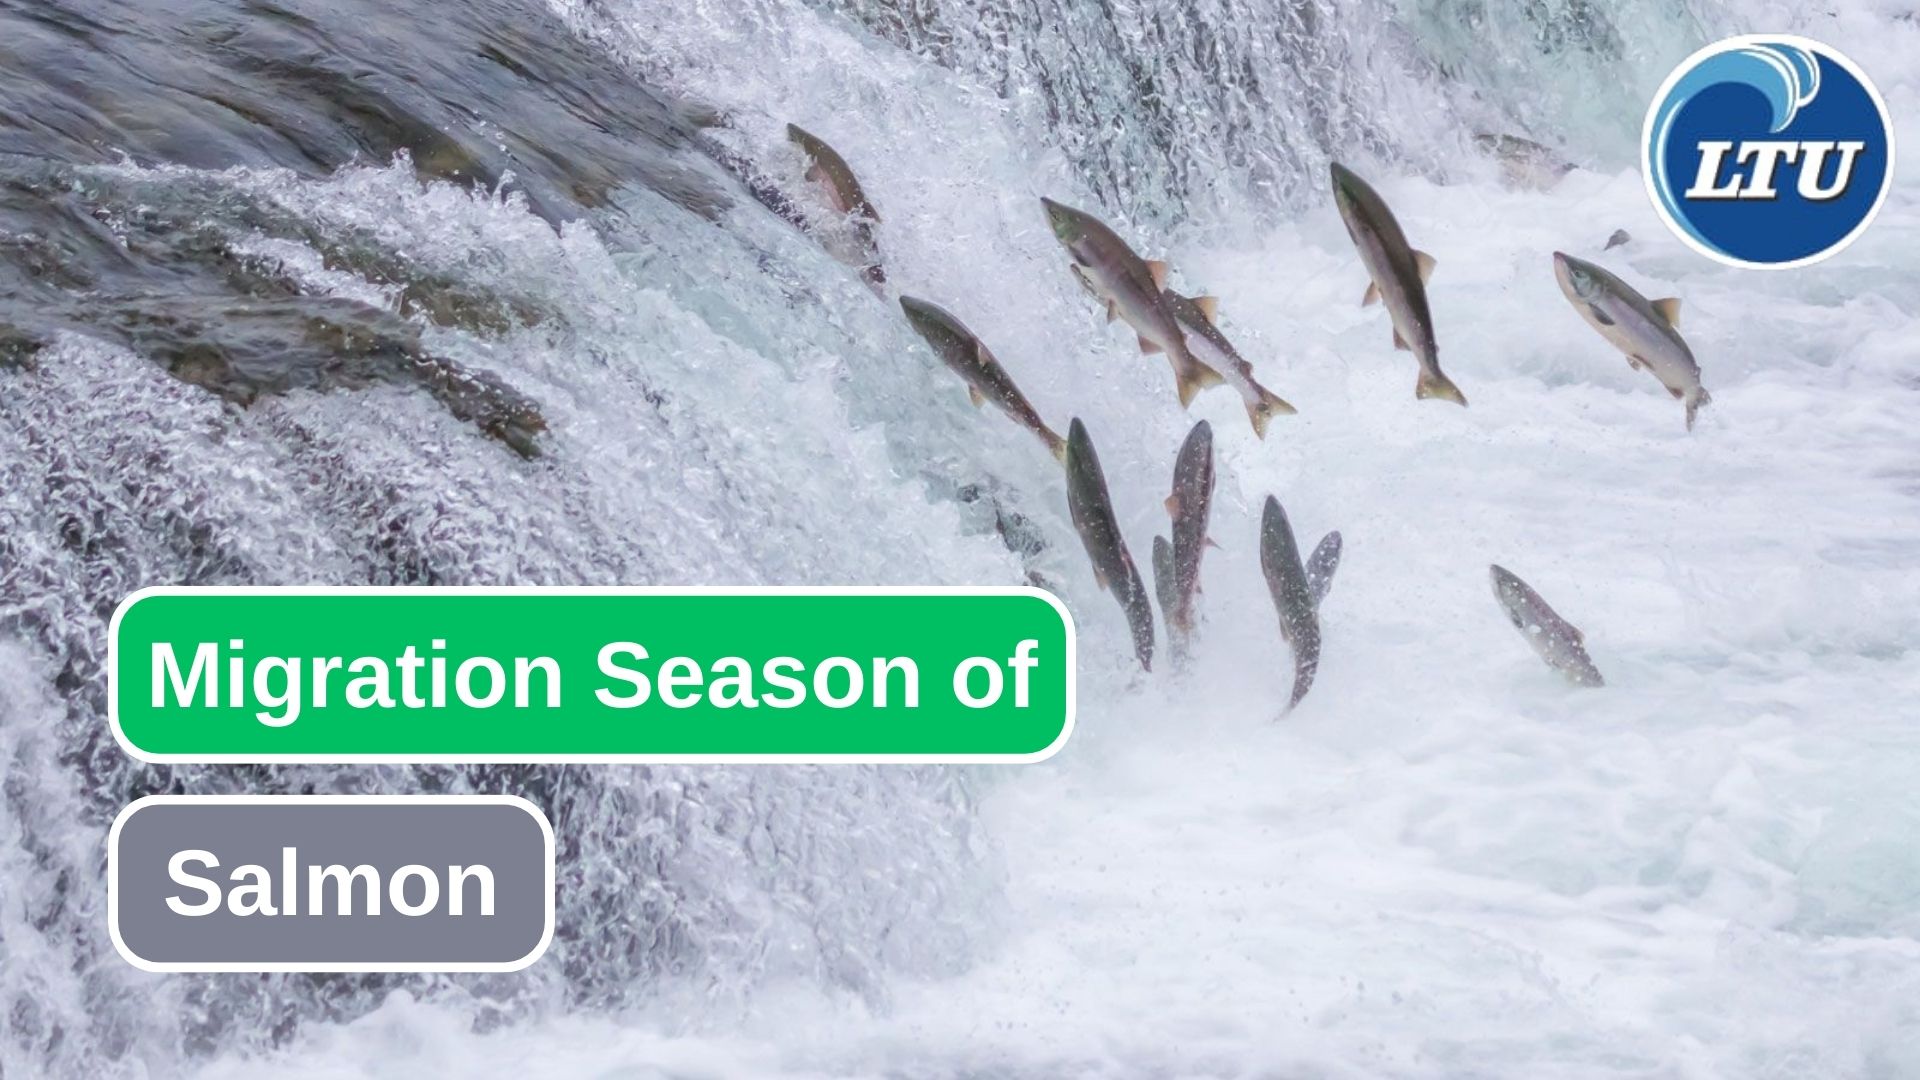 The Annual Journey of Salmon